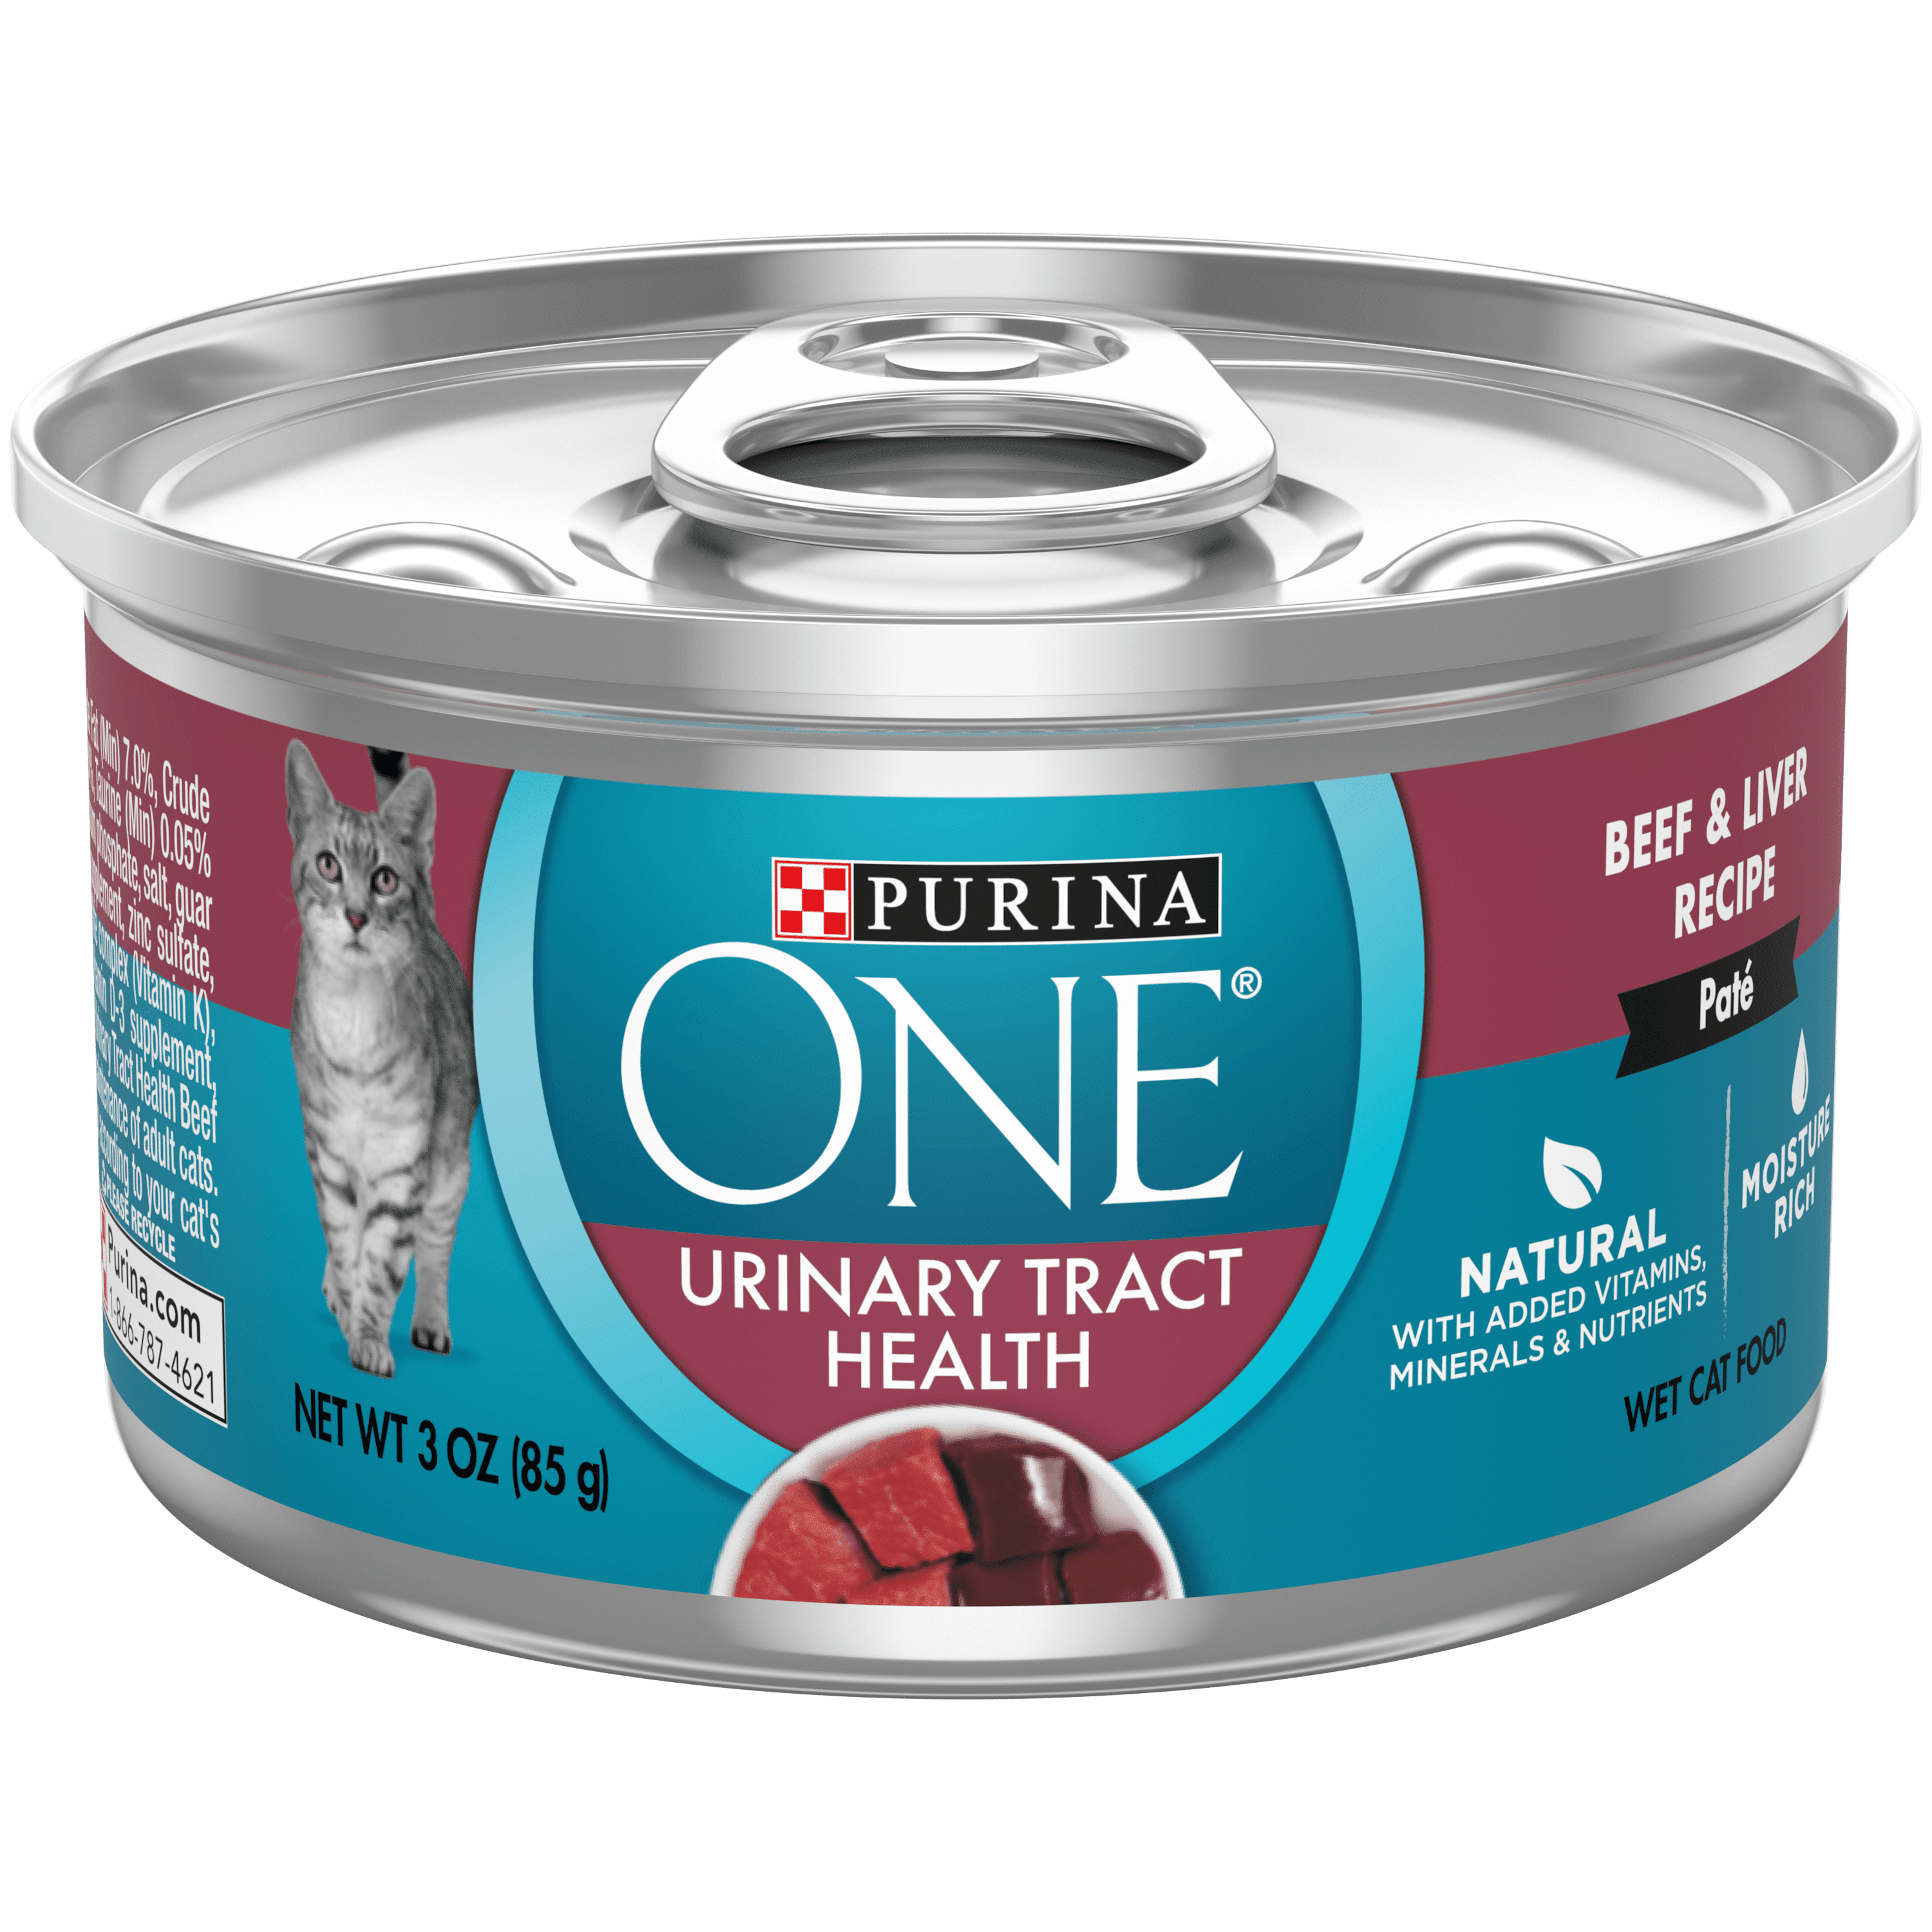 Purina ONE Urinary Tract Health Natural Pate Wet Cat Food Urinary Tract